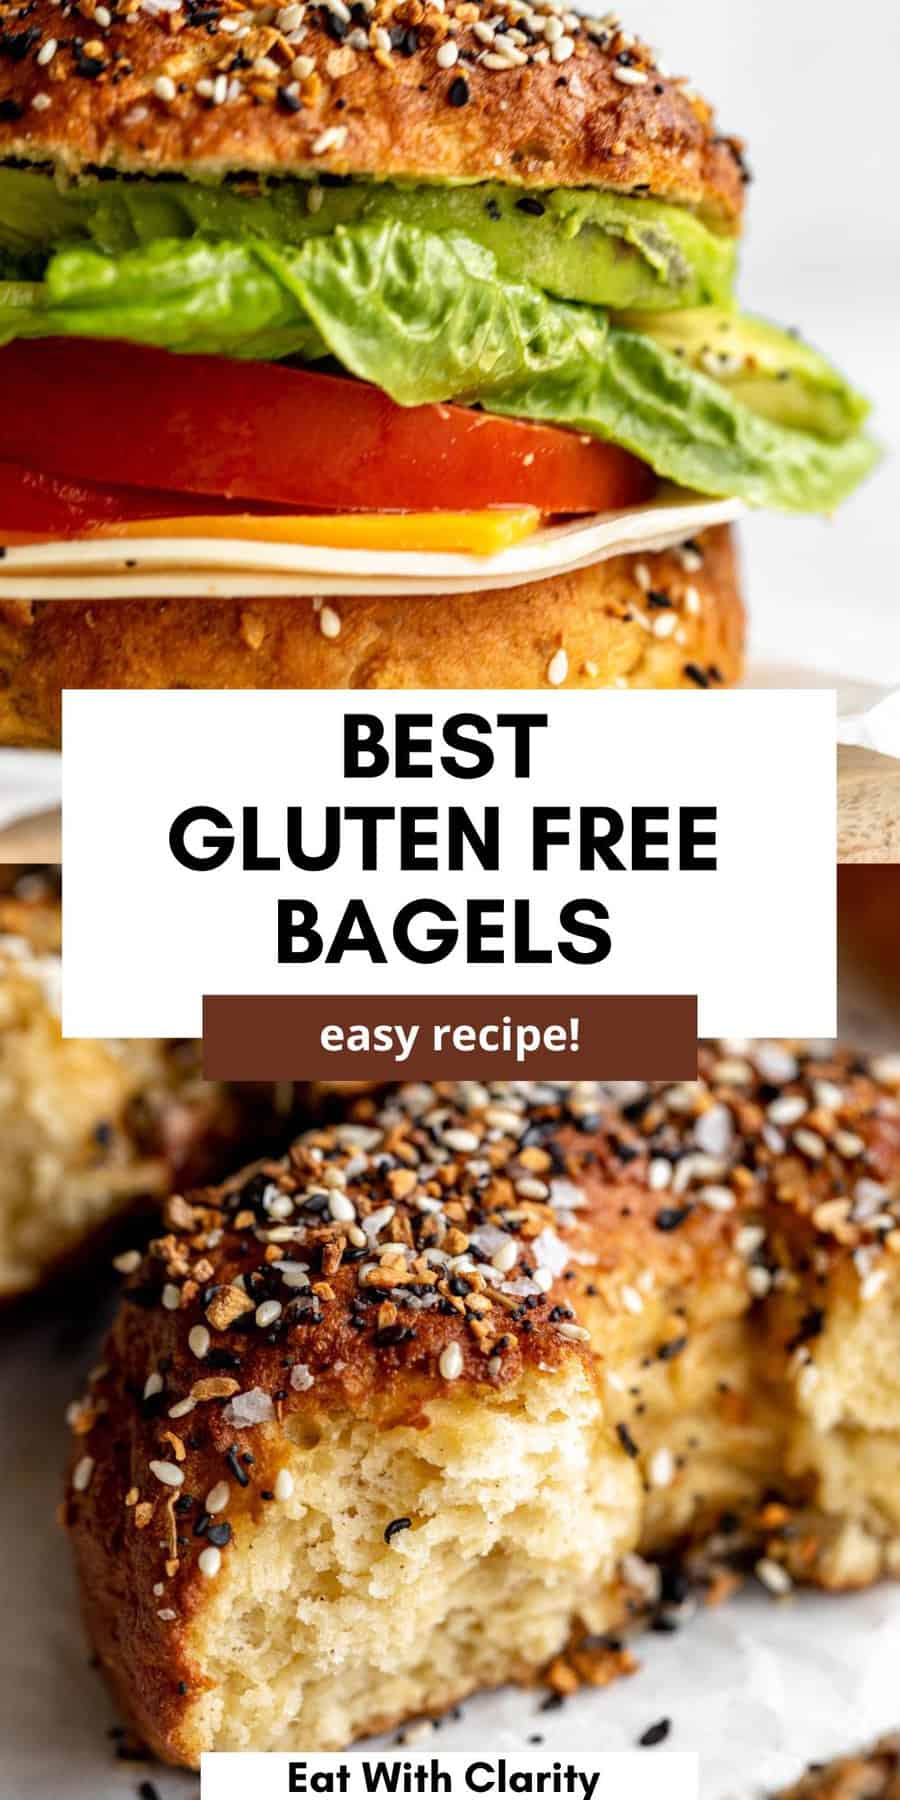 BEST Gluten Free Bagels - Eat With Clarity